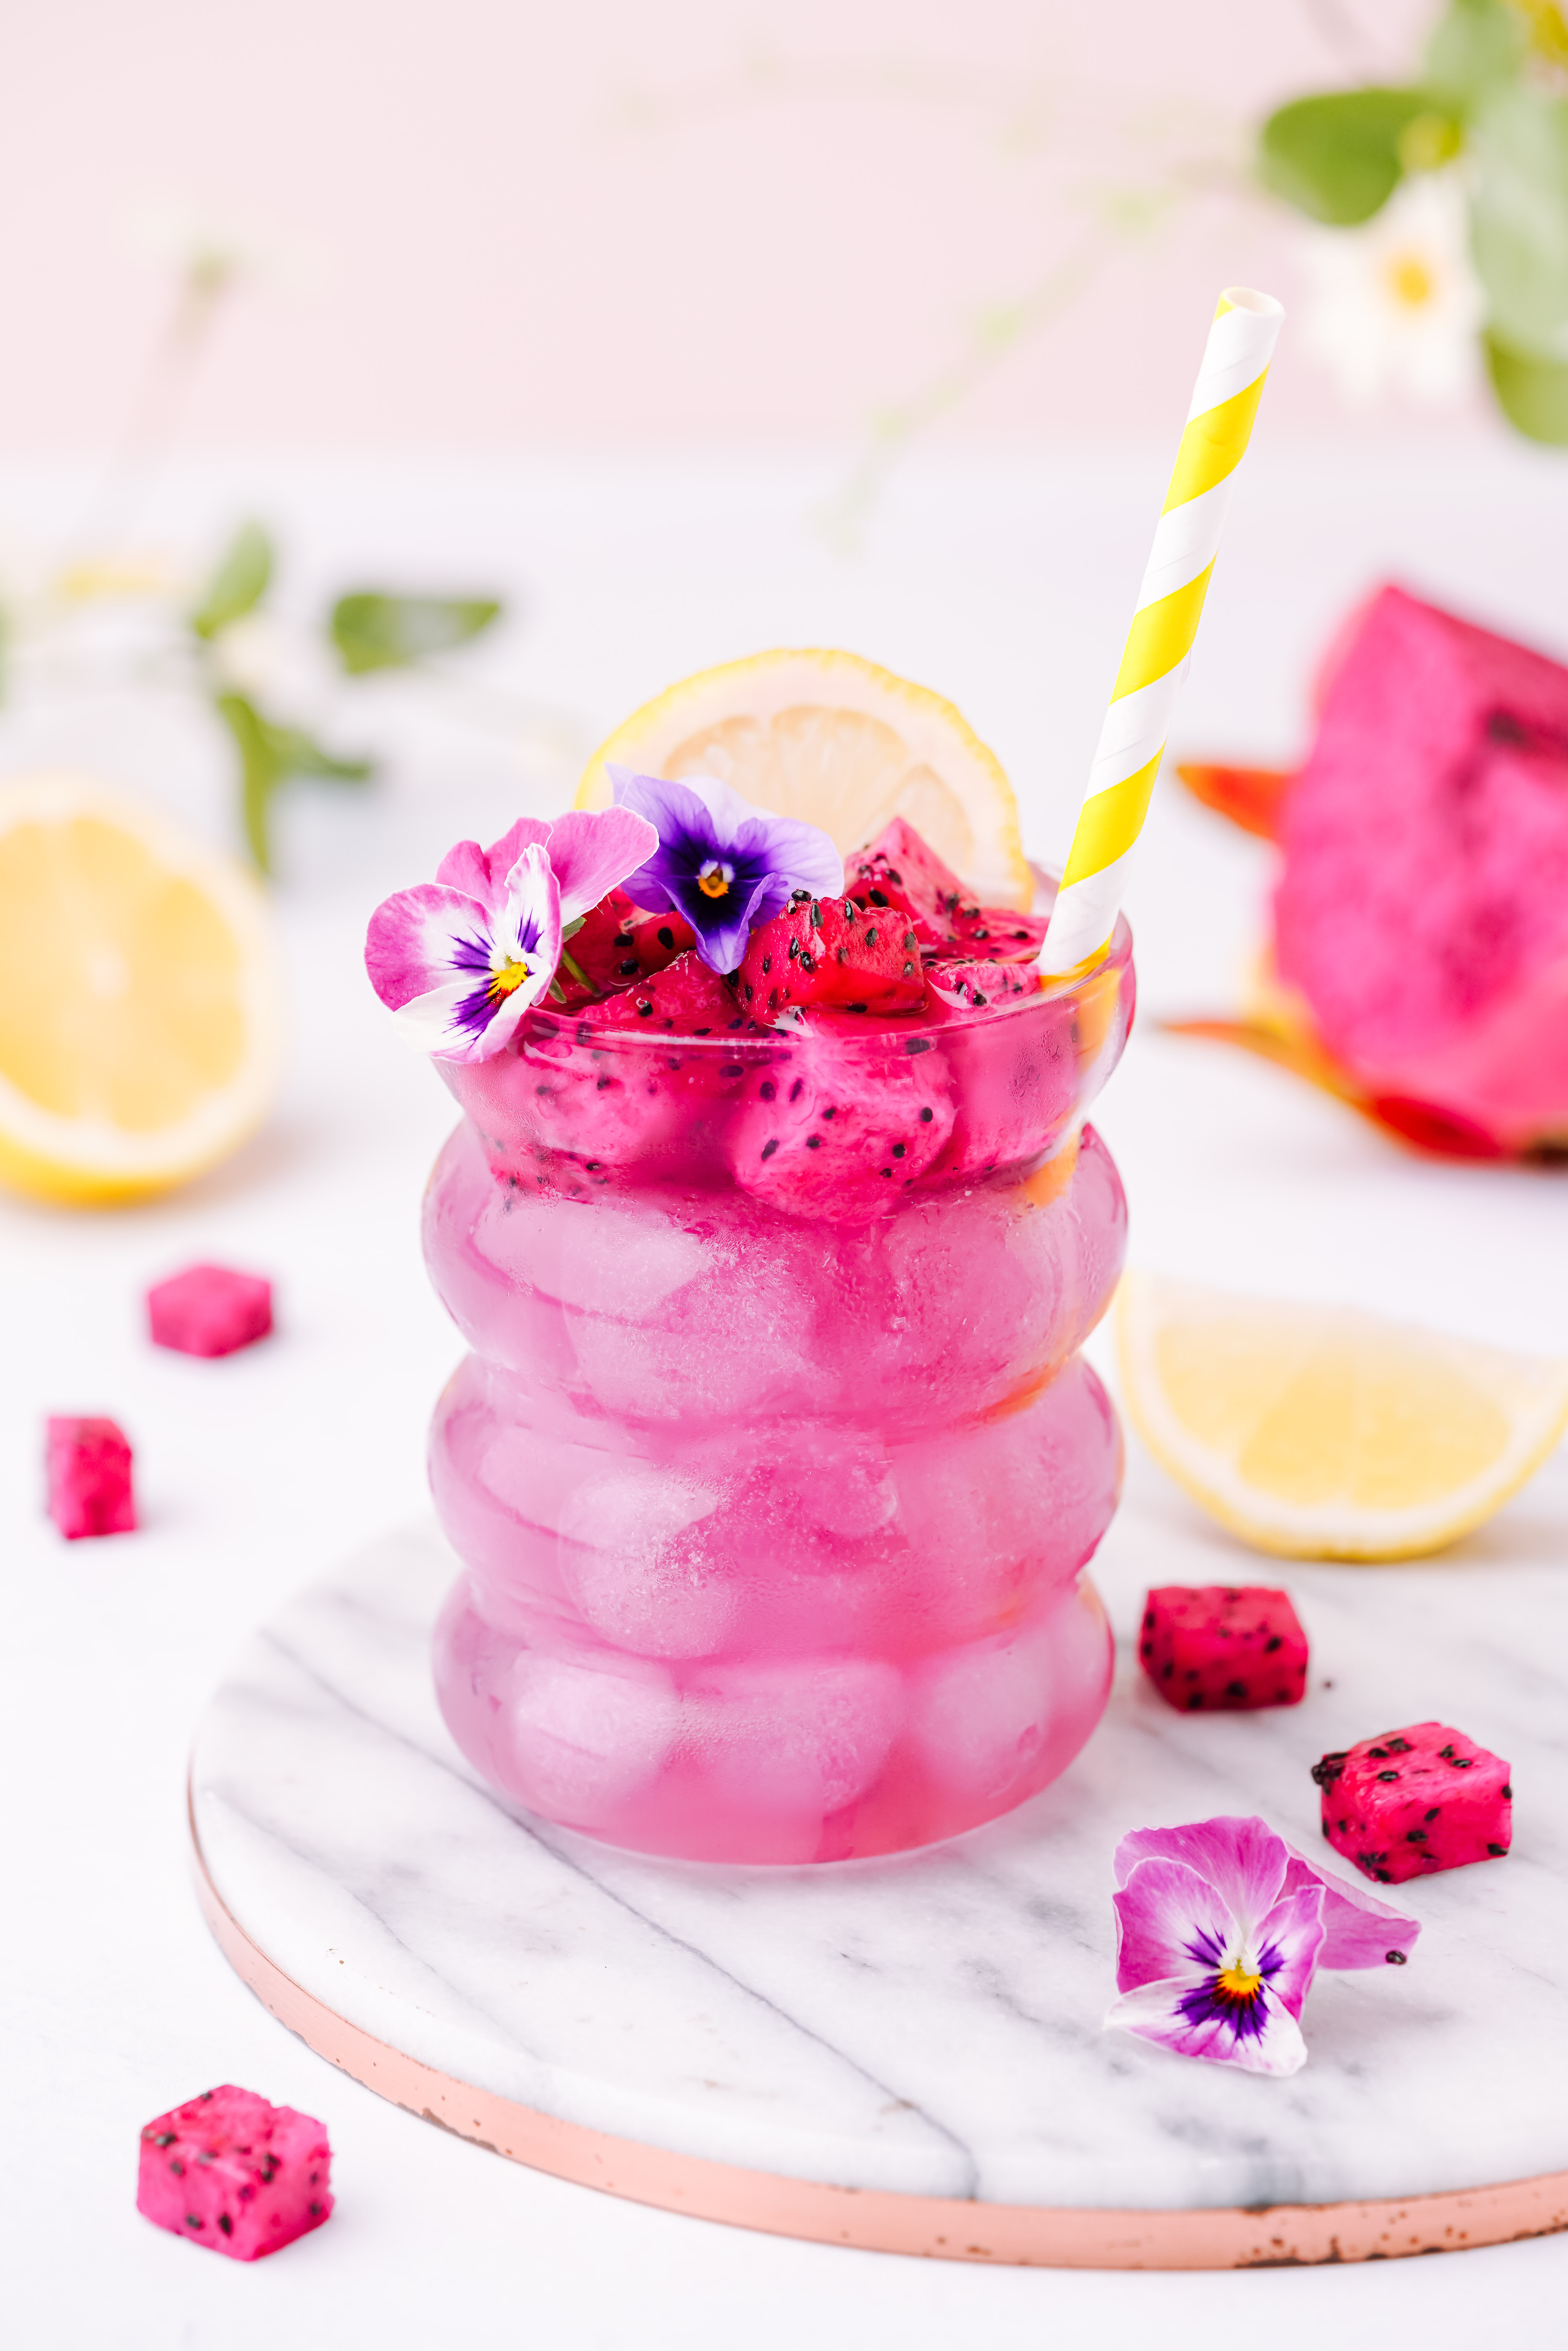 A Floral Summer Spritz: Cheers to edible flowers in and on our drinks